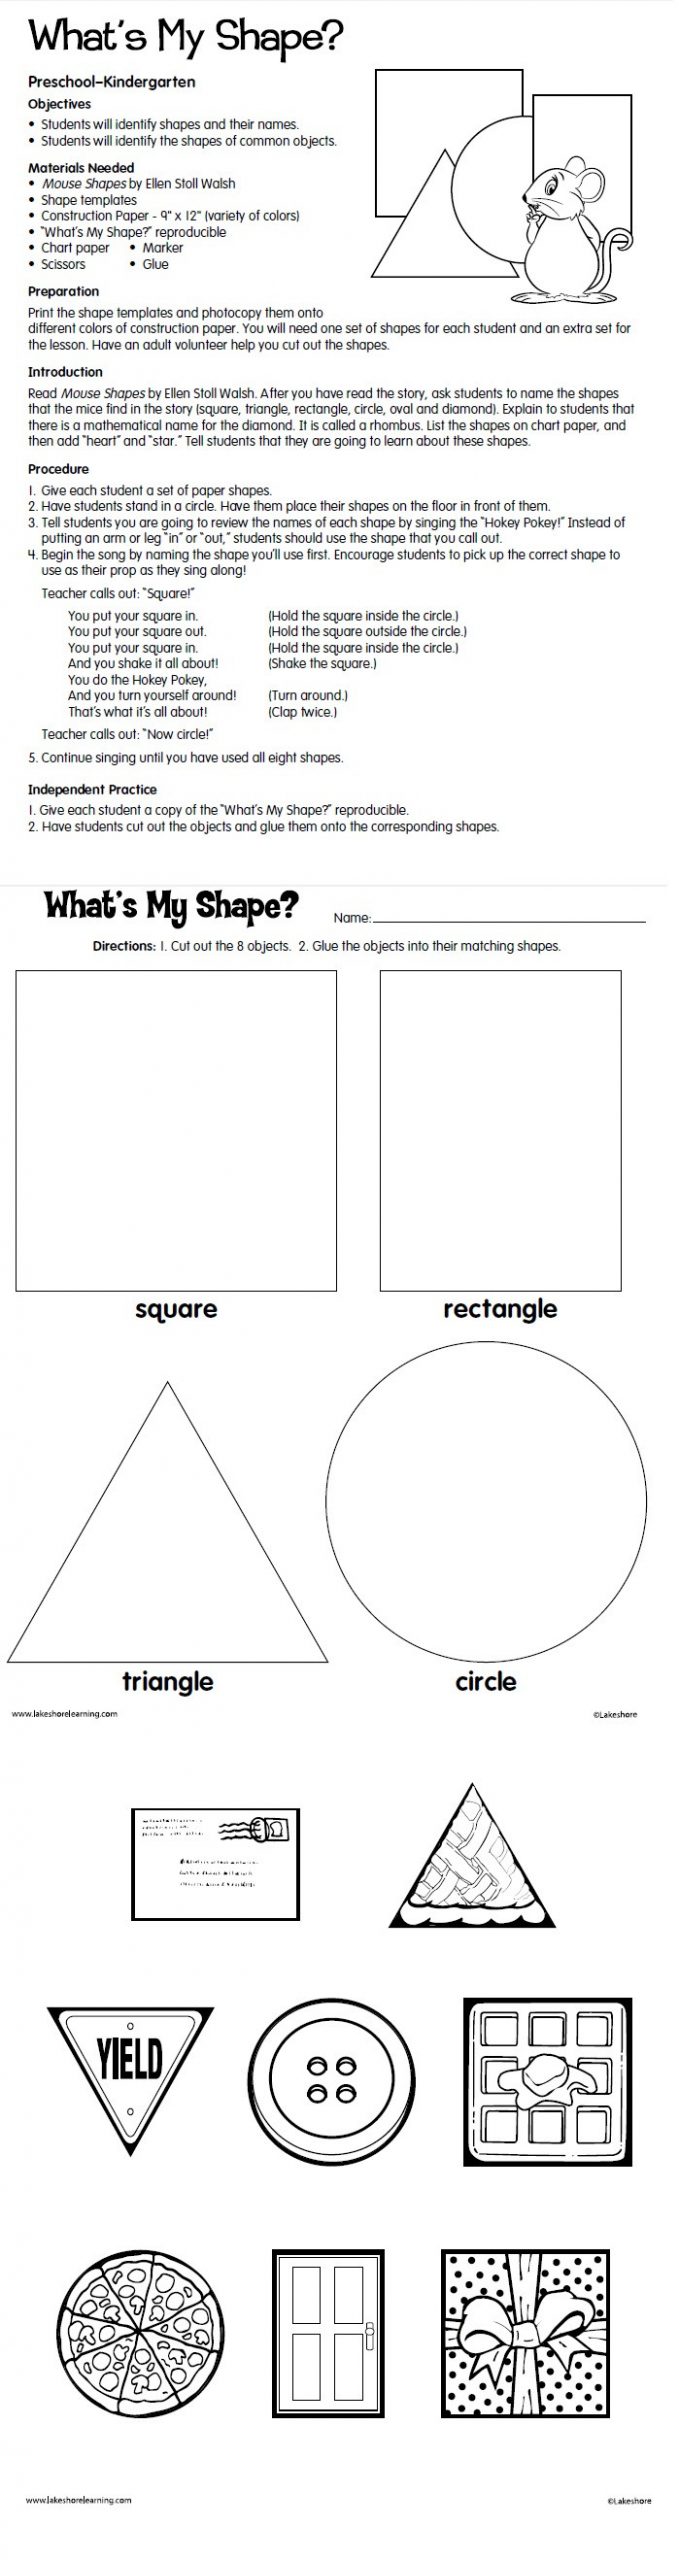 Shapes Lesson Plan for Preschool What’s My Shape Lesson Plan From Lakeshore Learning